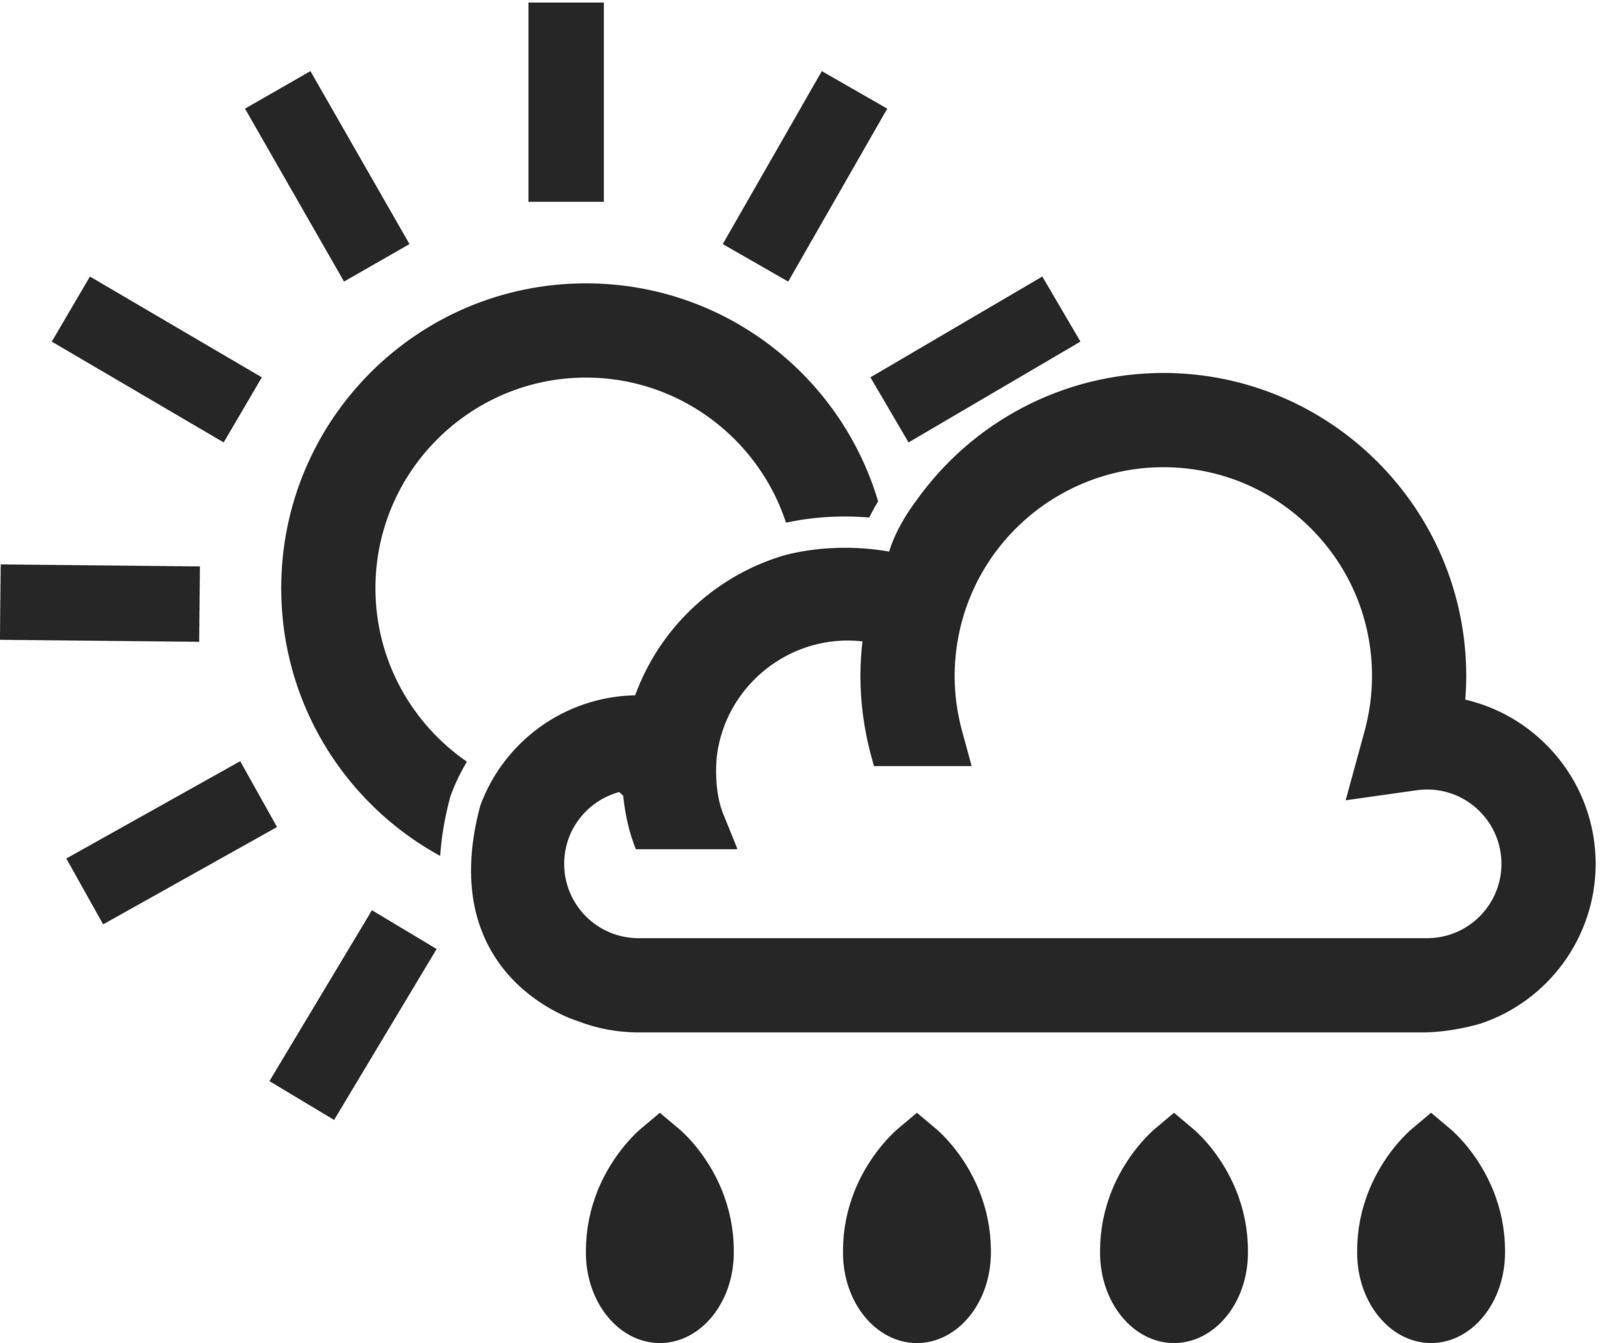 Rainy icon in thick outline style. Black and white monochrome vector illustration.